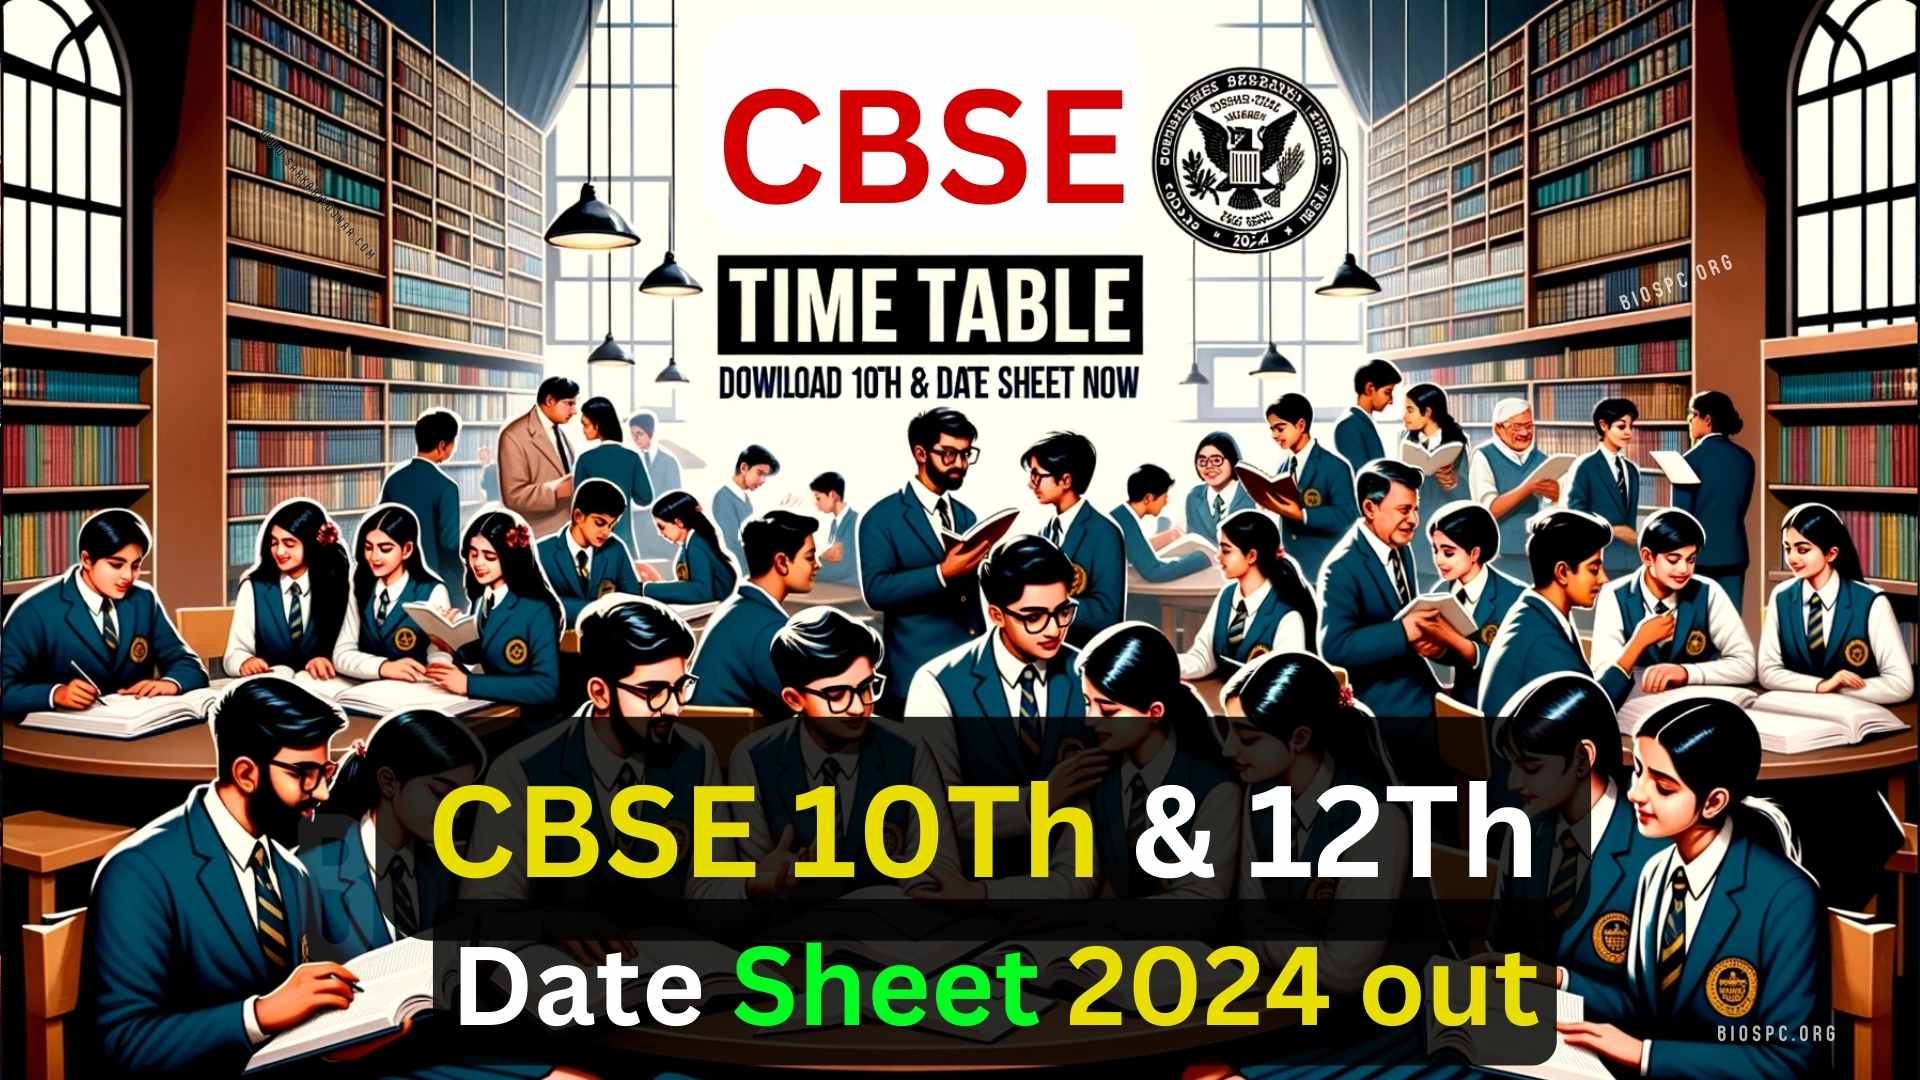 CBSE 2024 Time Table Download 10th & 12th Date Sheet PDF